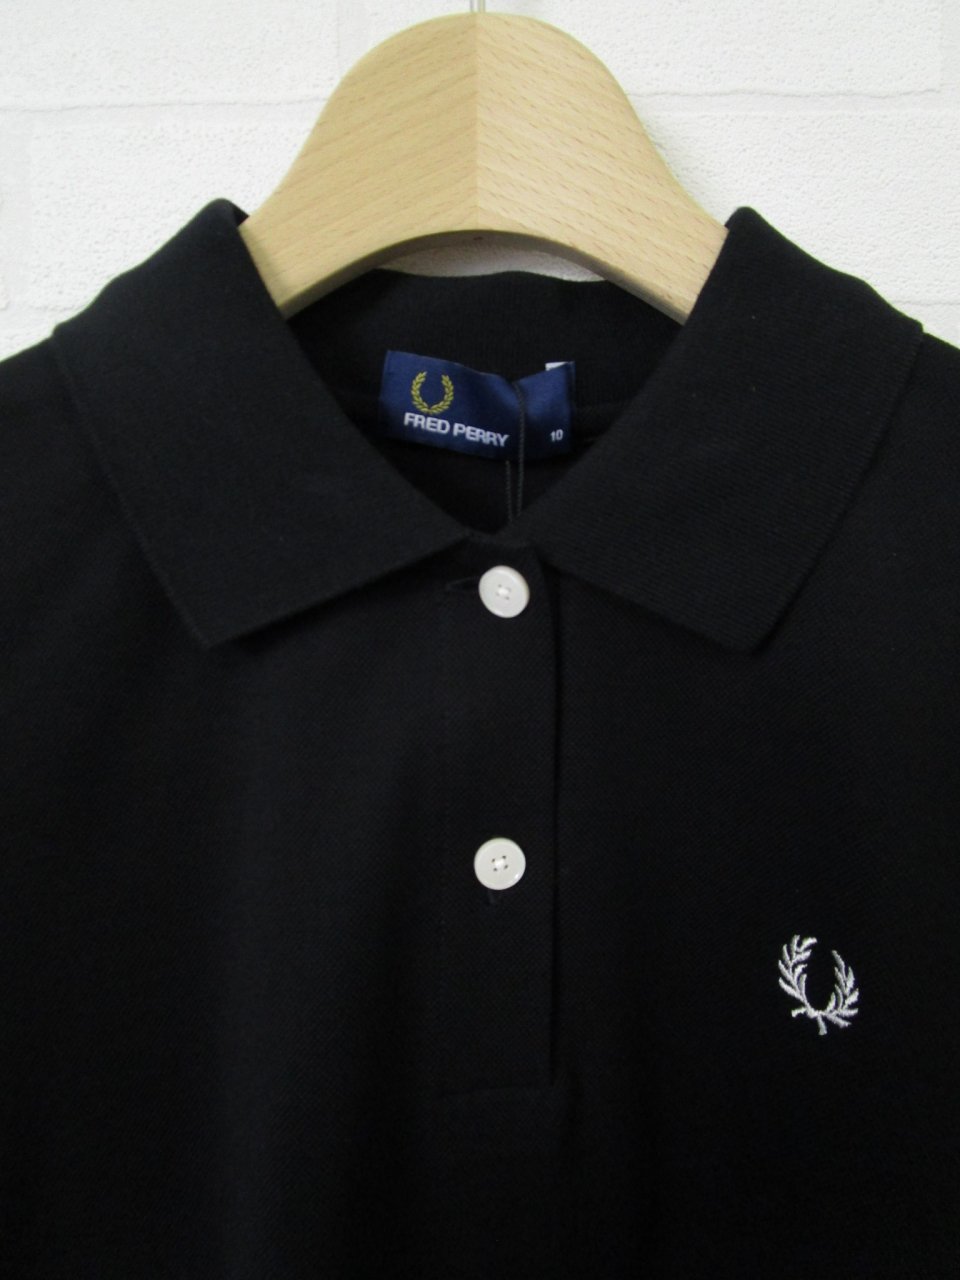 FRED PERRY - バックプリーツ ポロシャツ - Sheth Online Store - シス 